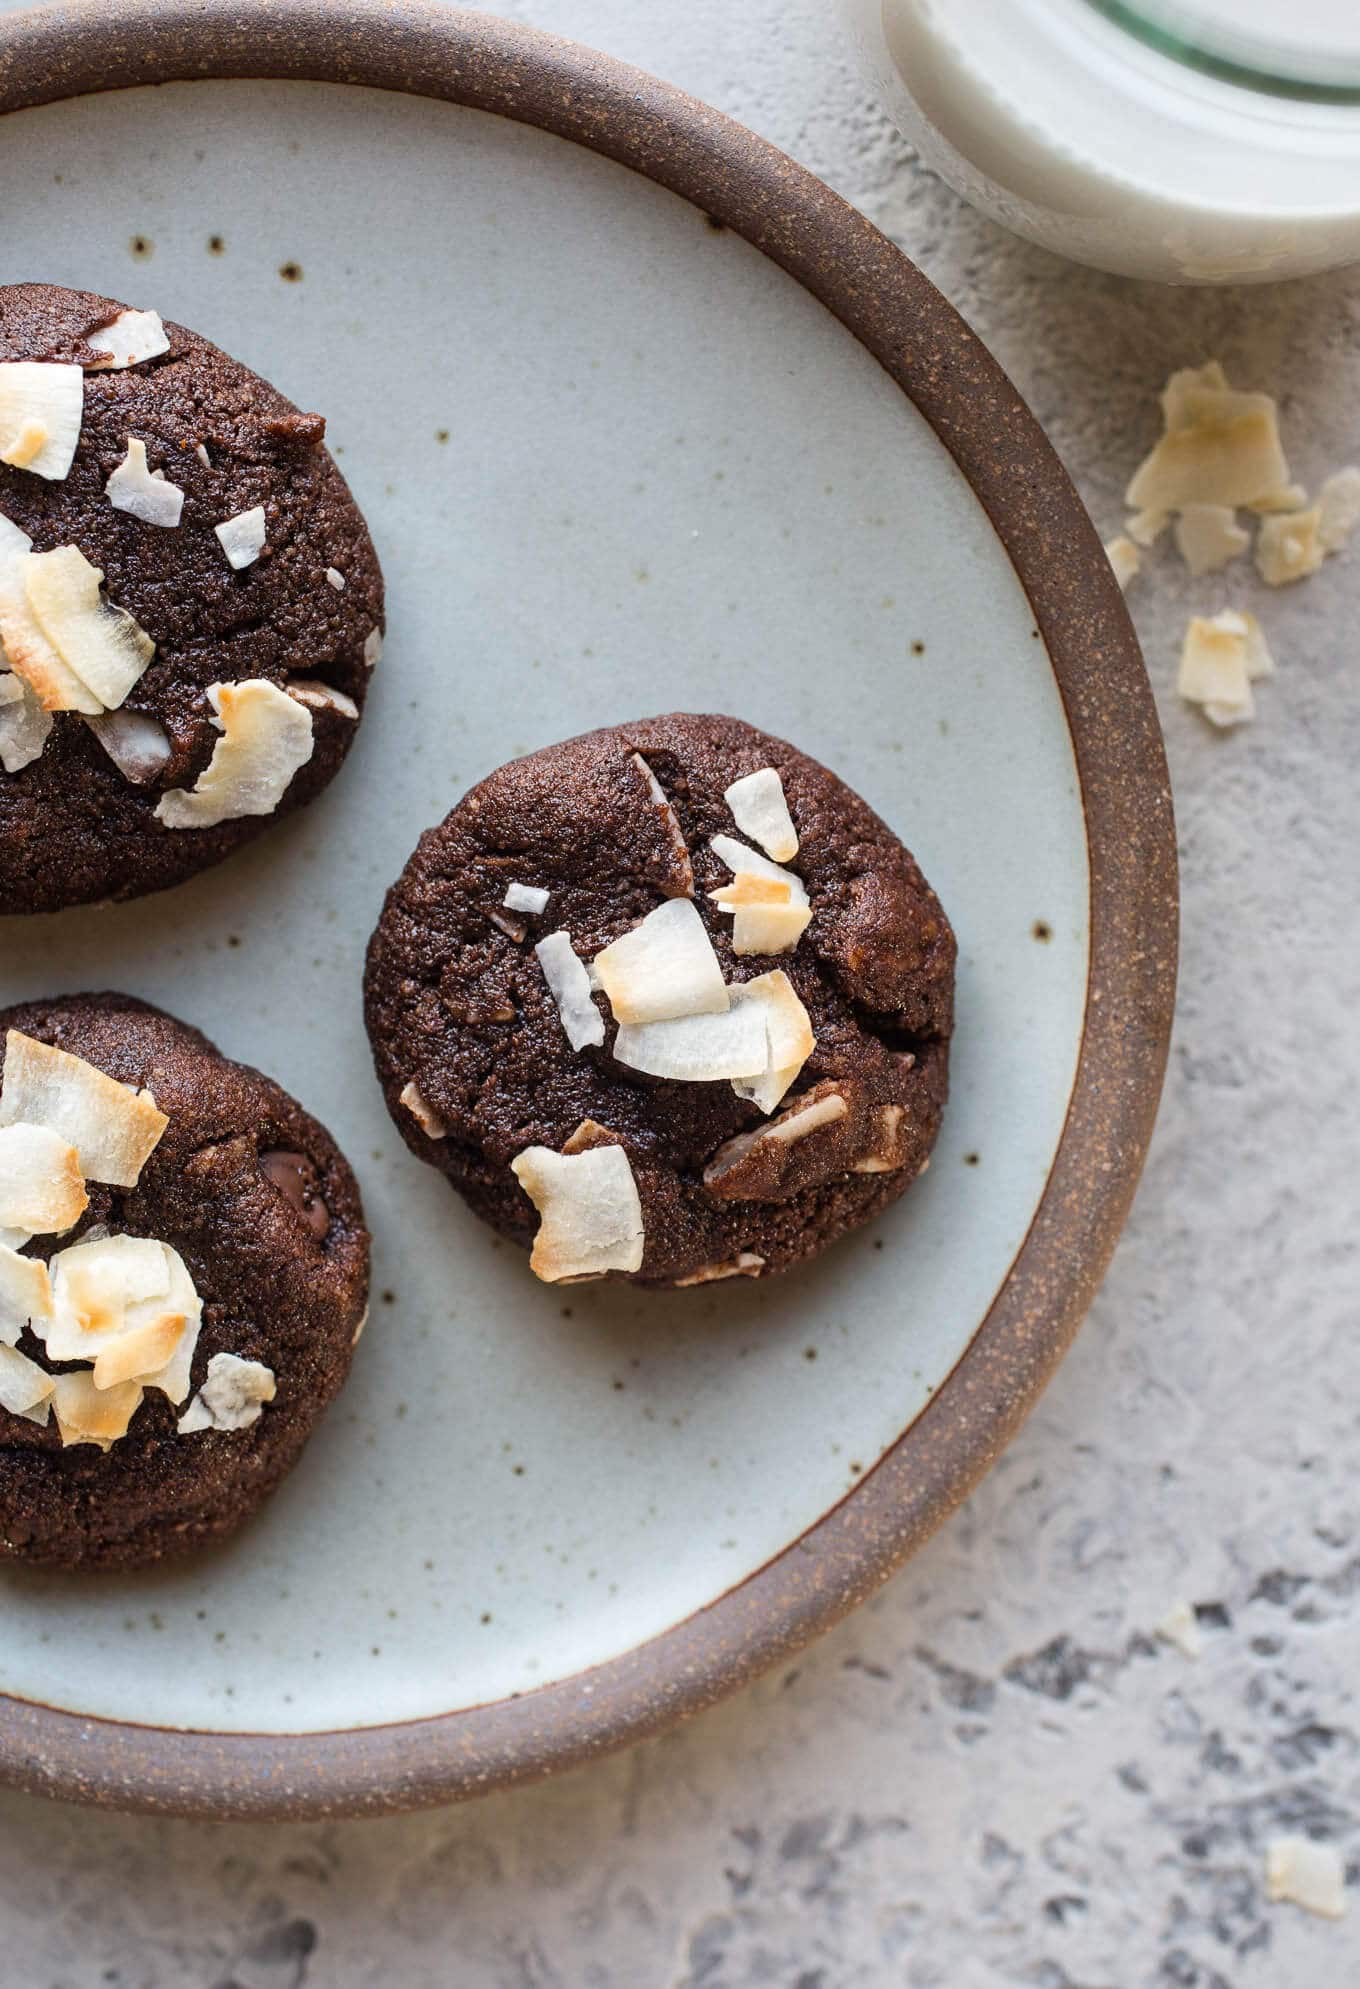 Double Chocolate Coconut Pecan Cookies are rich, chocolatey, and loaded with flaked coconut, pecans, and chocolate chips. Gluten-free, paleo, dairy-free.